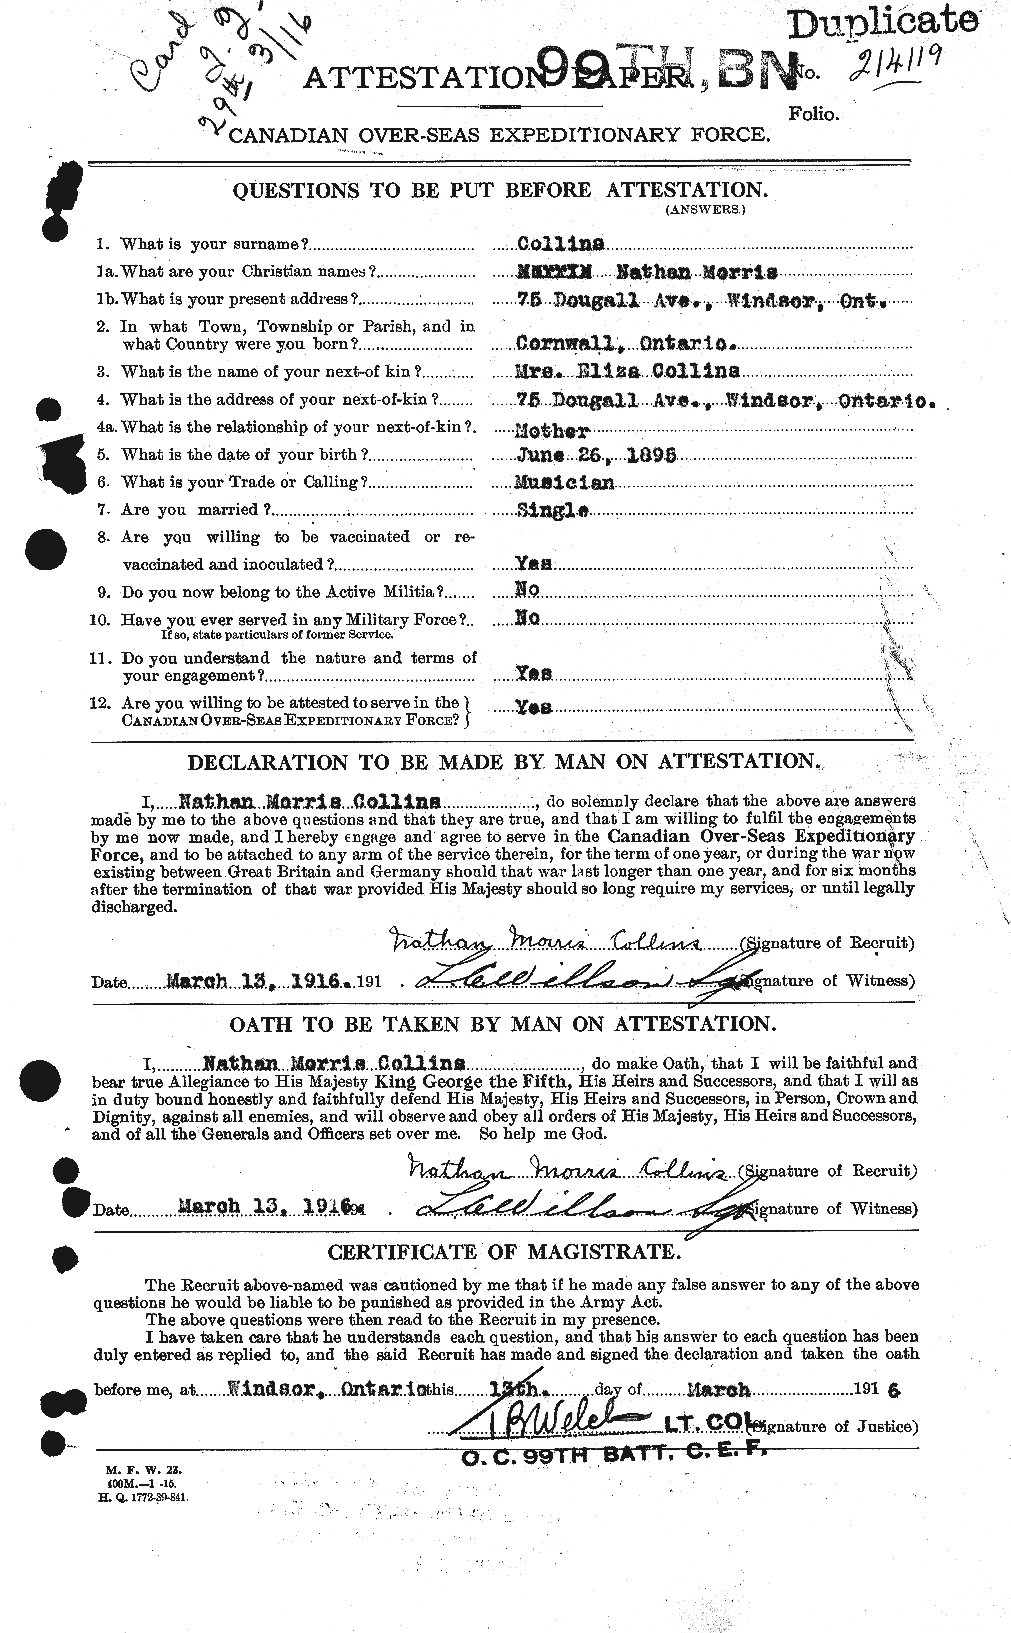 Personnel Records of the First World War - CEF 069311a